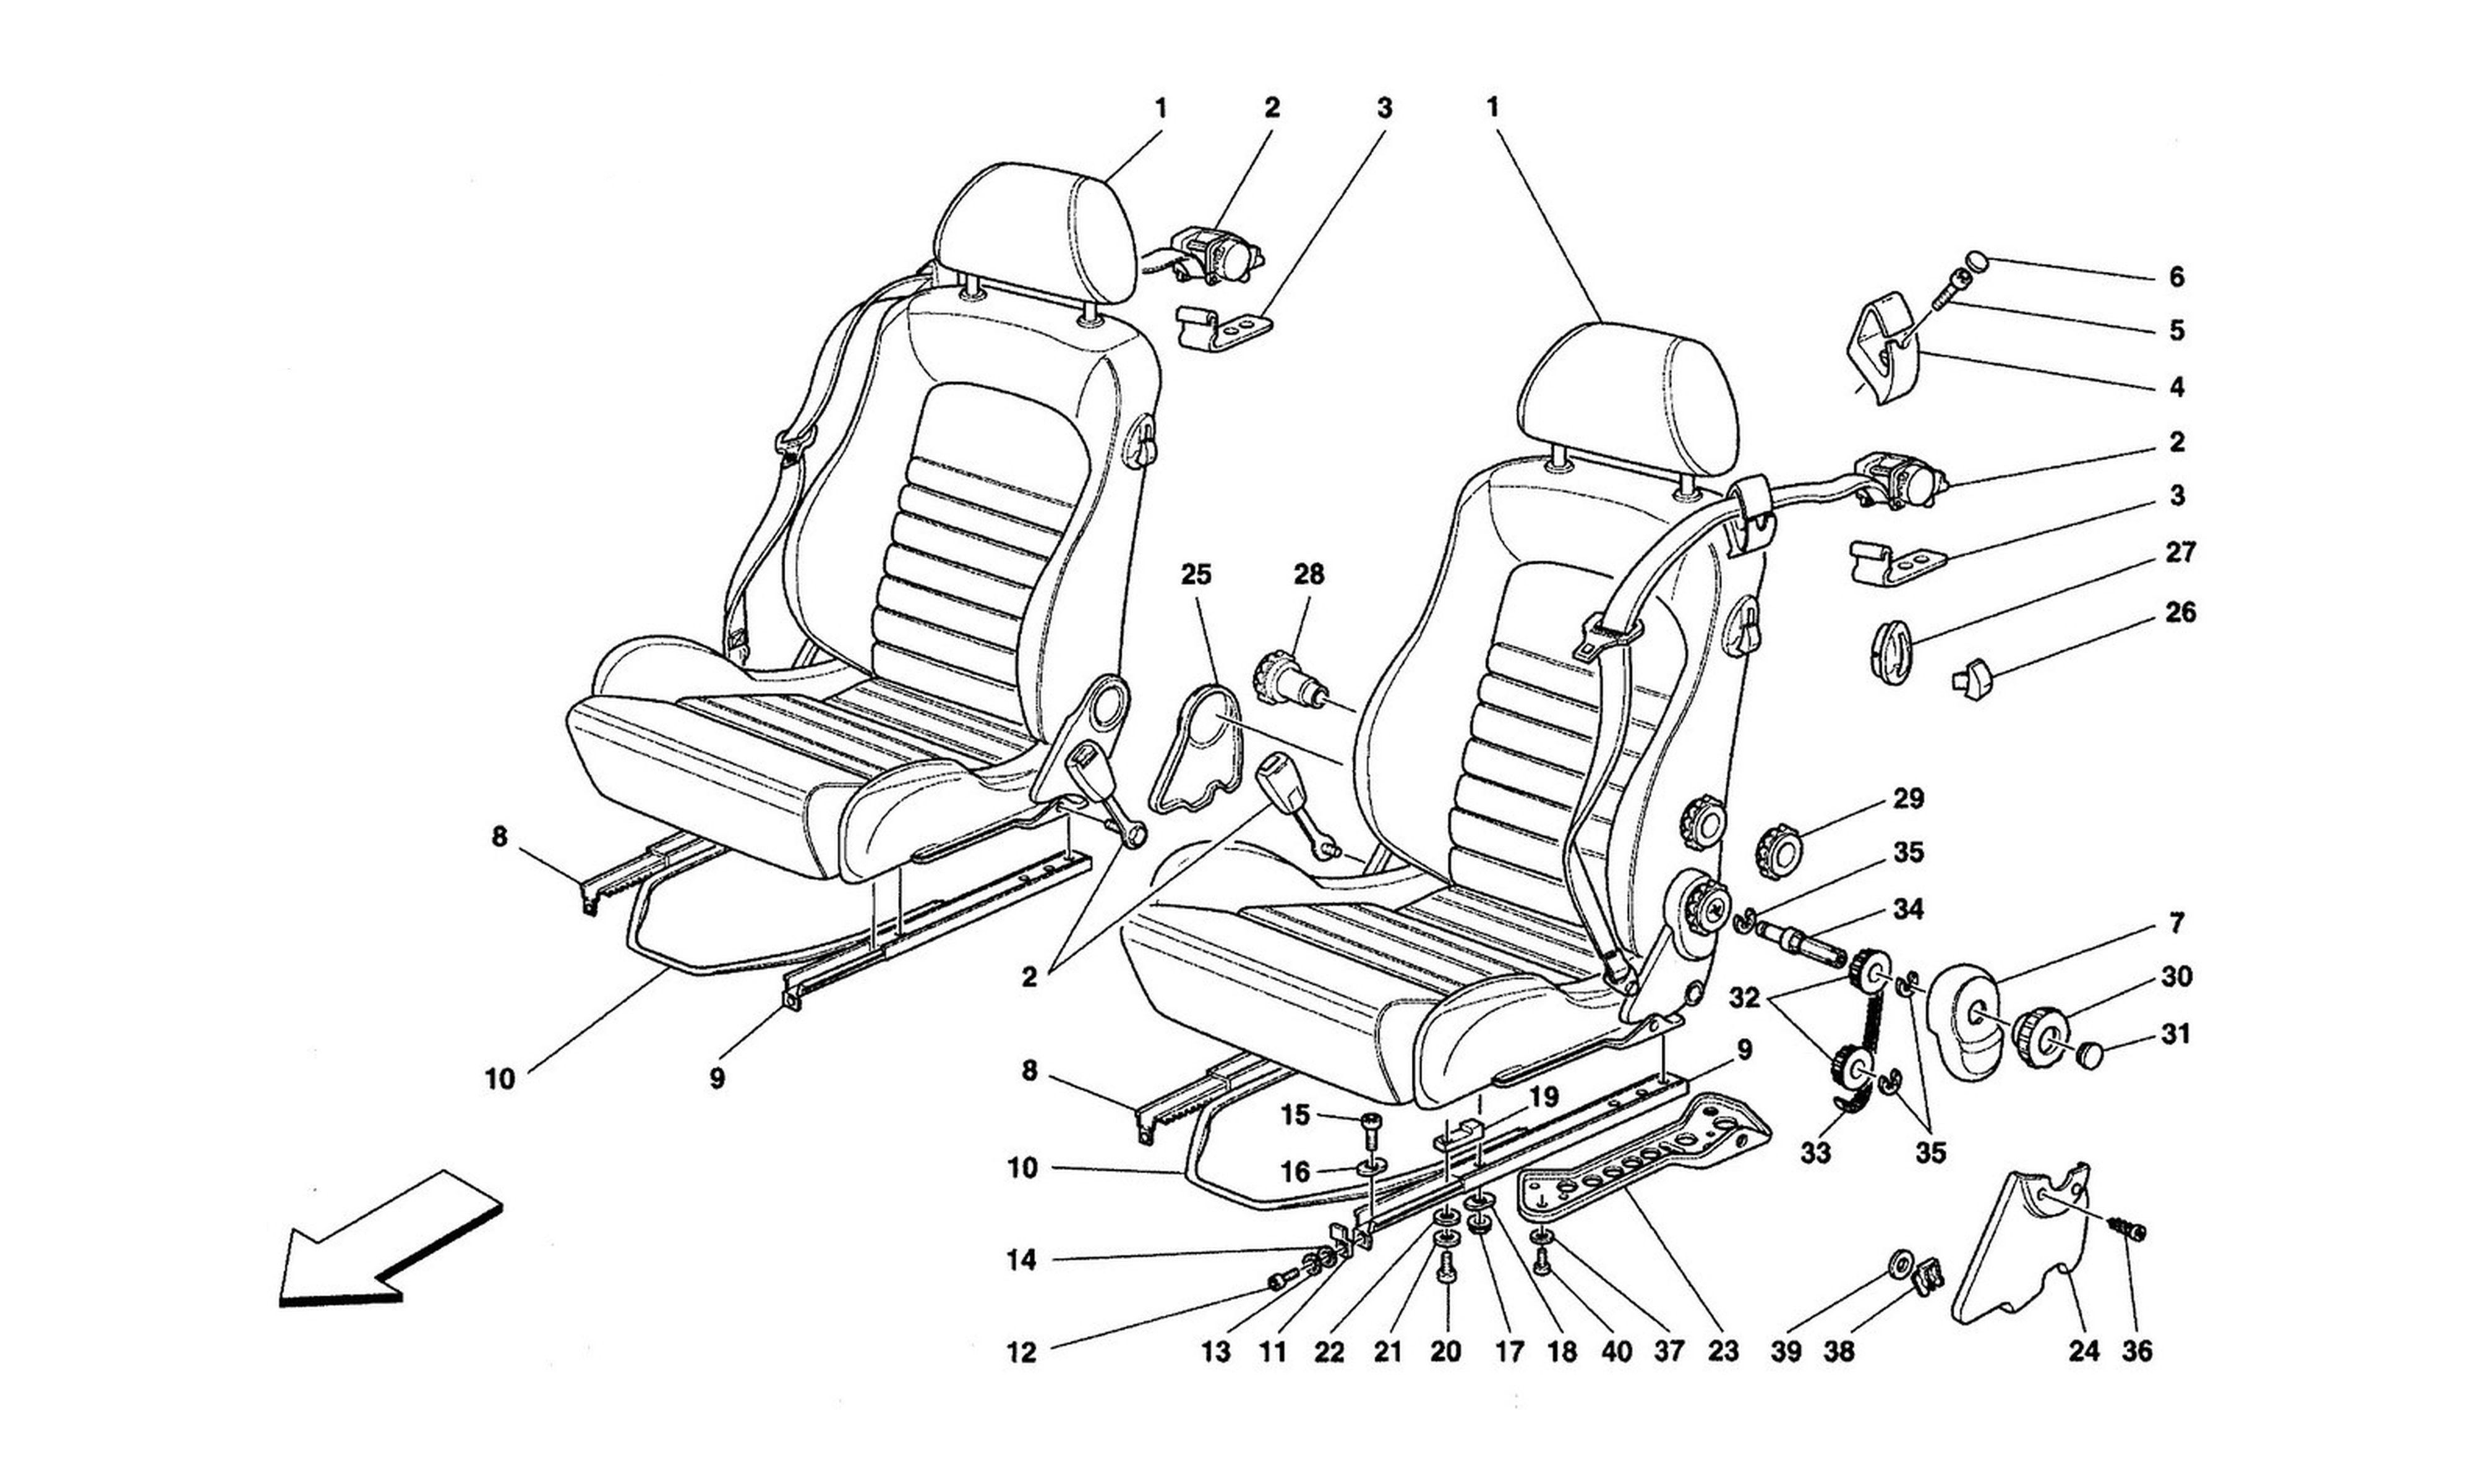 Schematic: Seat And Safety Belts -Comfort-Not For Spider-